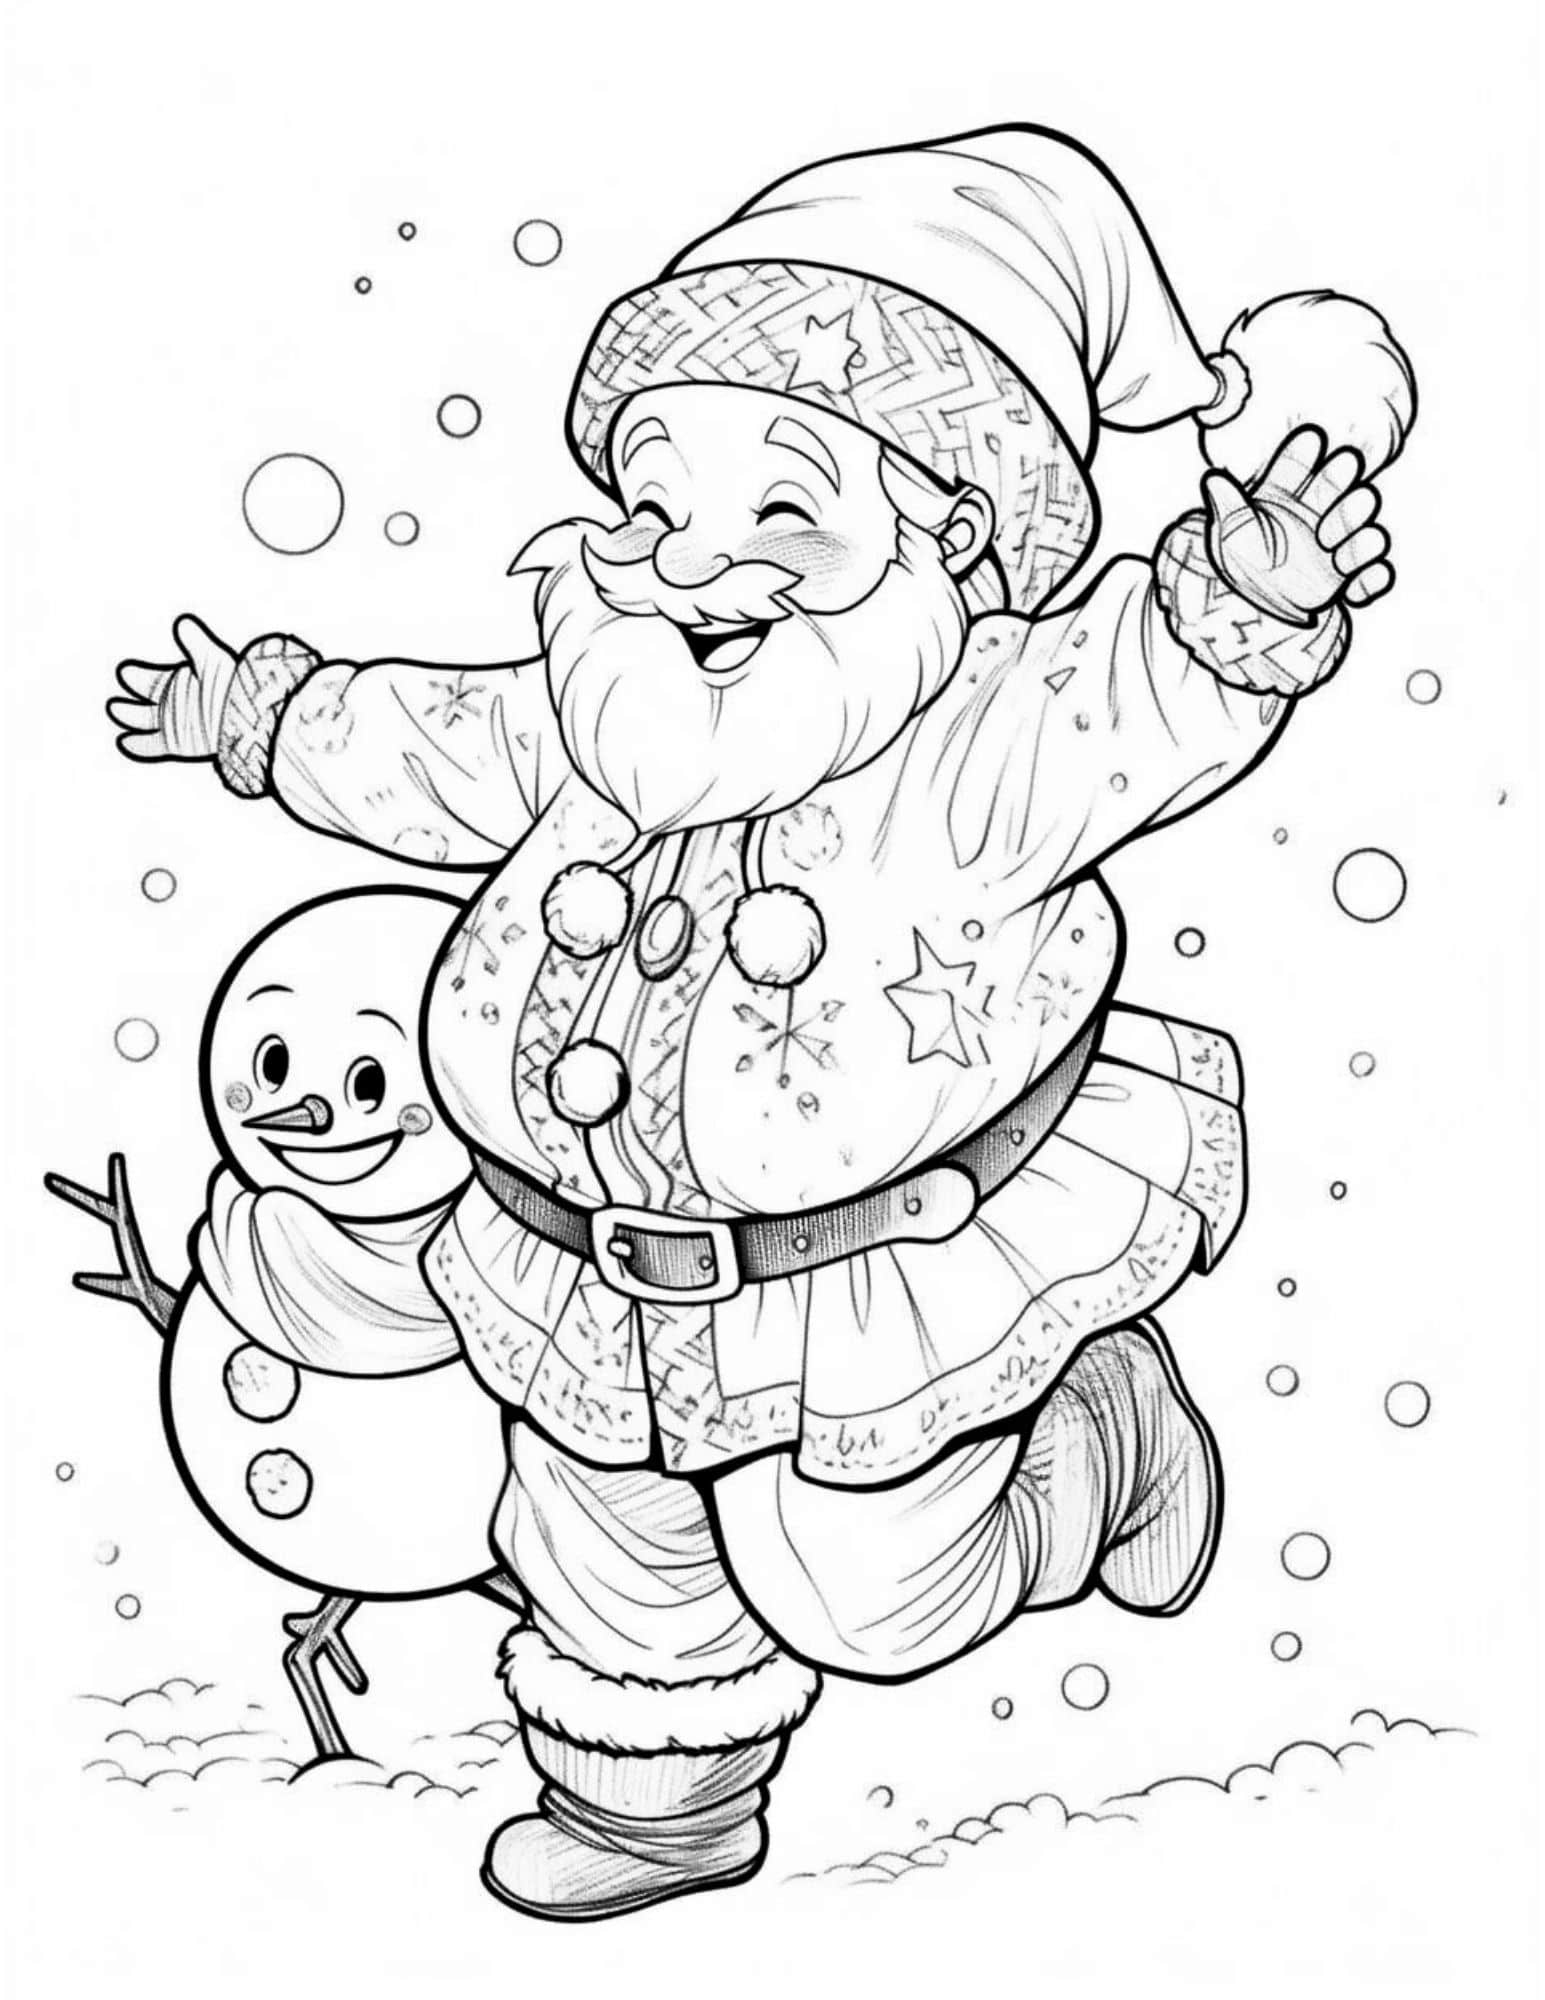 61 Cheerful Christmas Coloring Pages For Kids And Adults - Our - Free Full Size Printable Christmas Coloring Pages